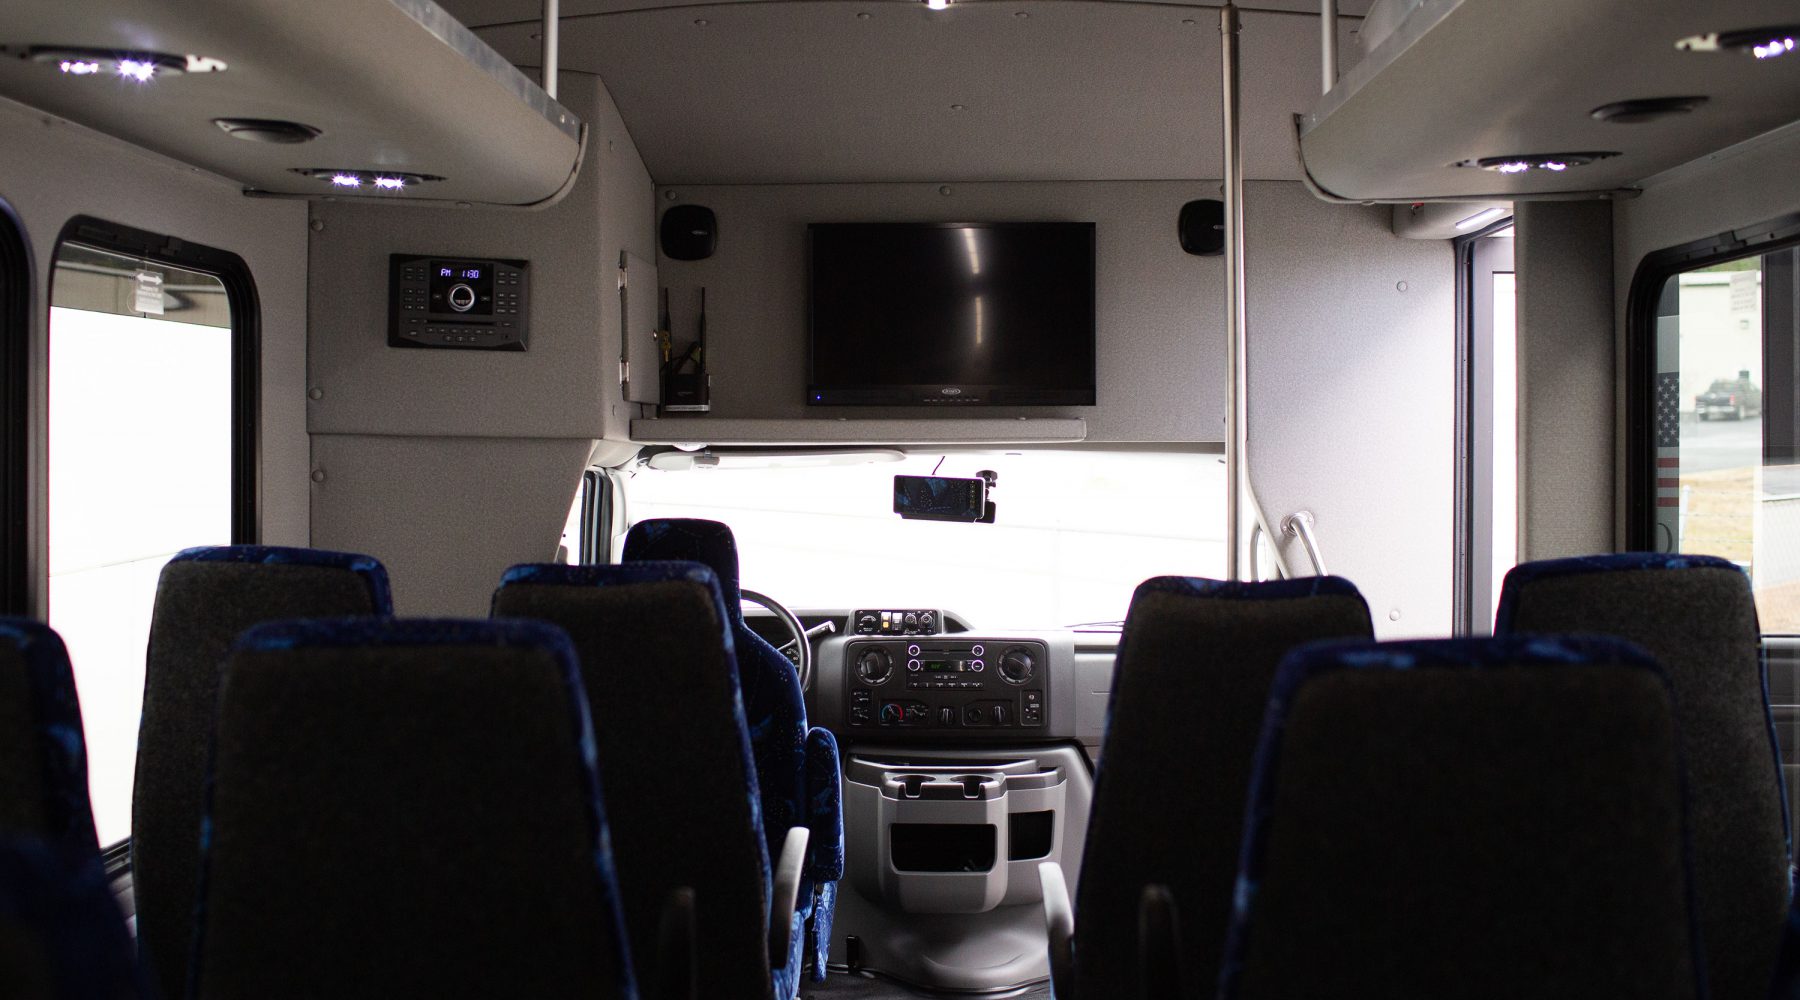 TV at the front of a bus